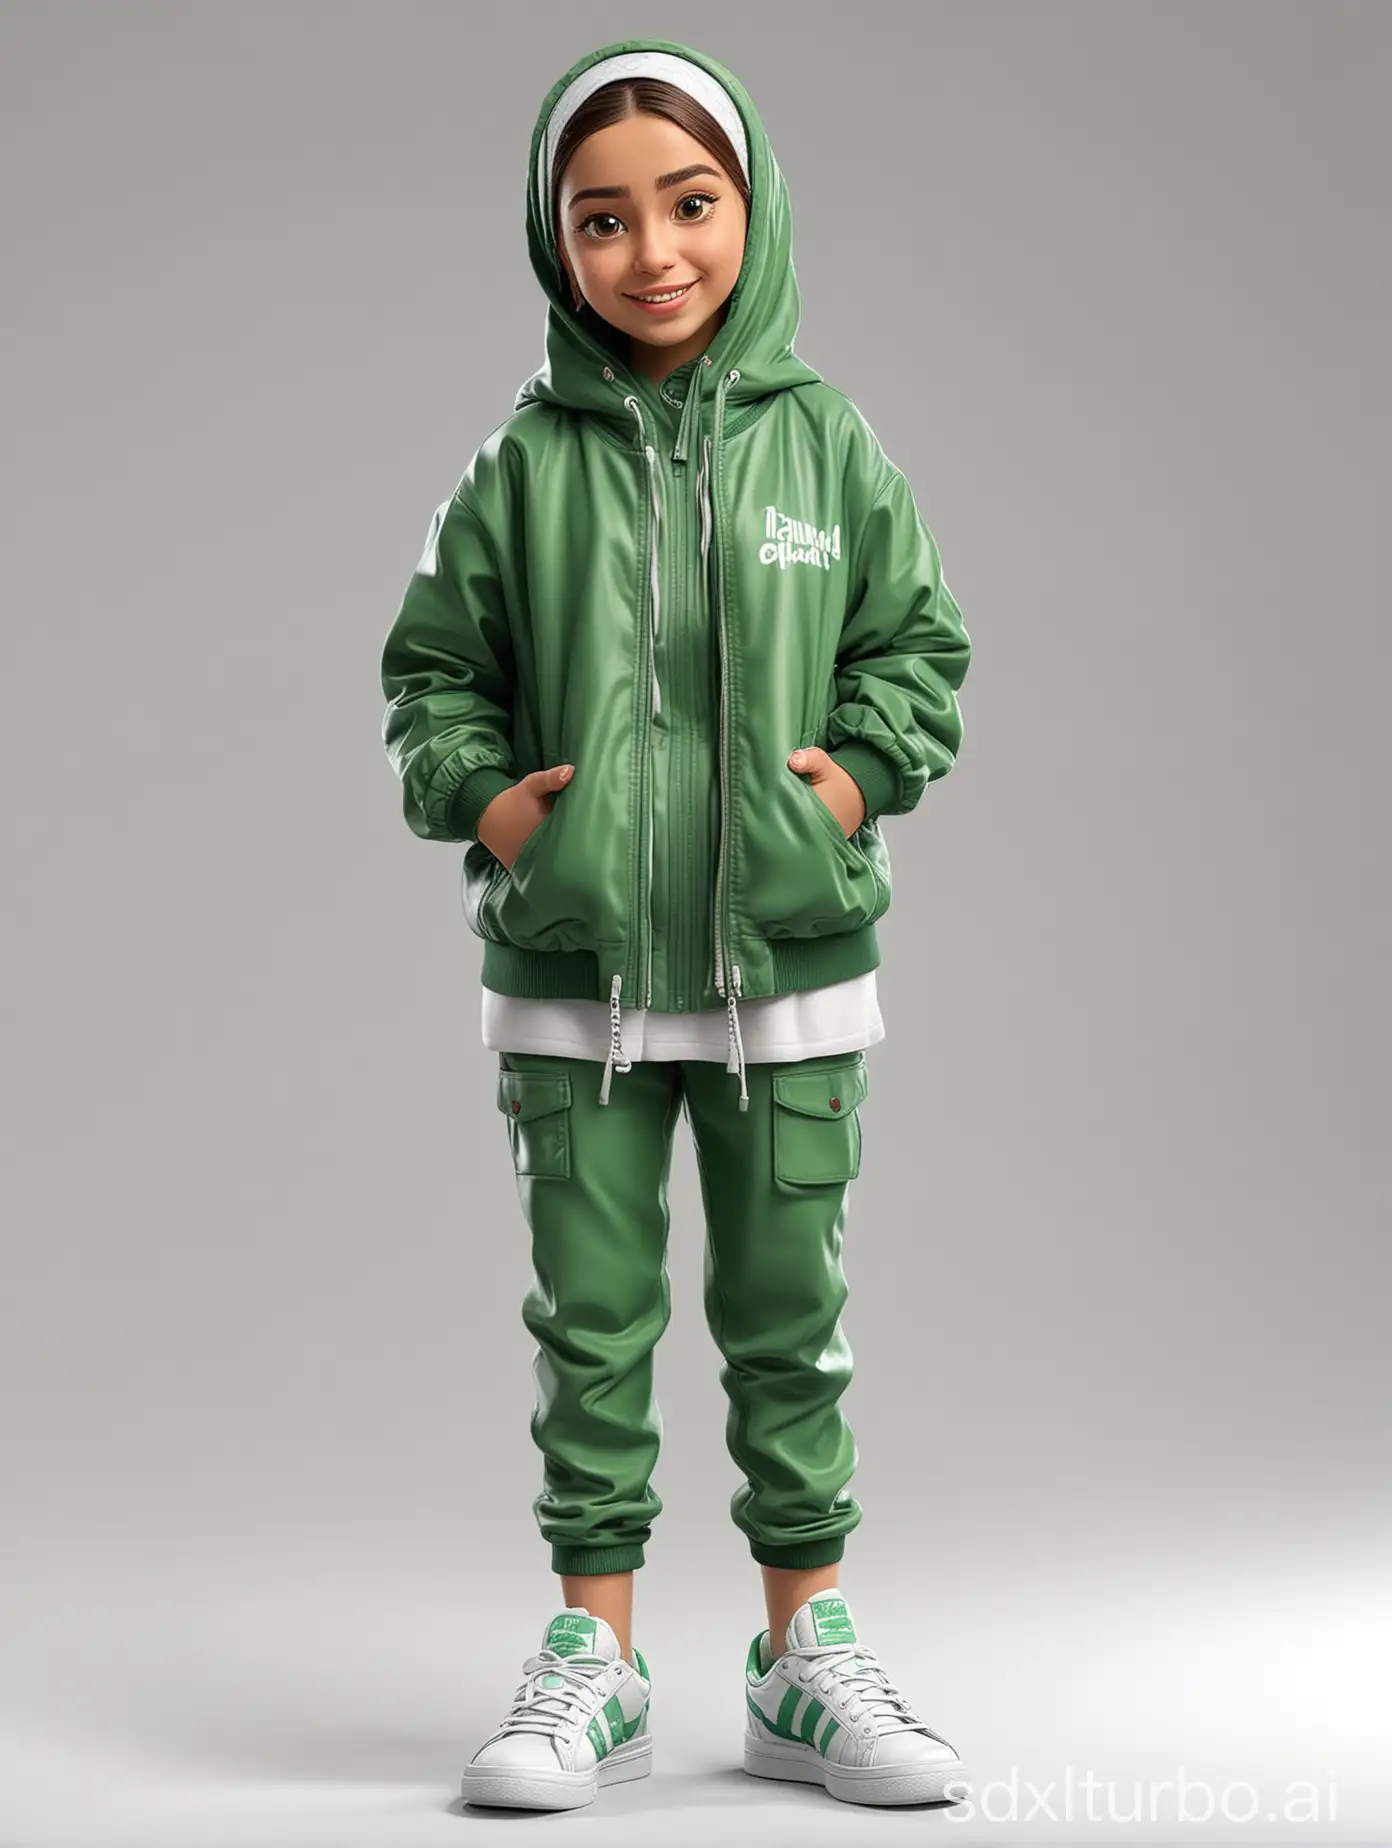 Stylish-Muslim-Girl-in-Green-Jacket-and-Sneakers-Poses-Against-White-Background